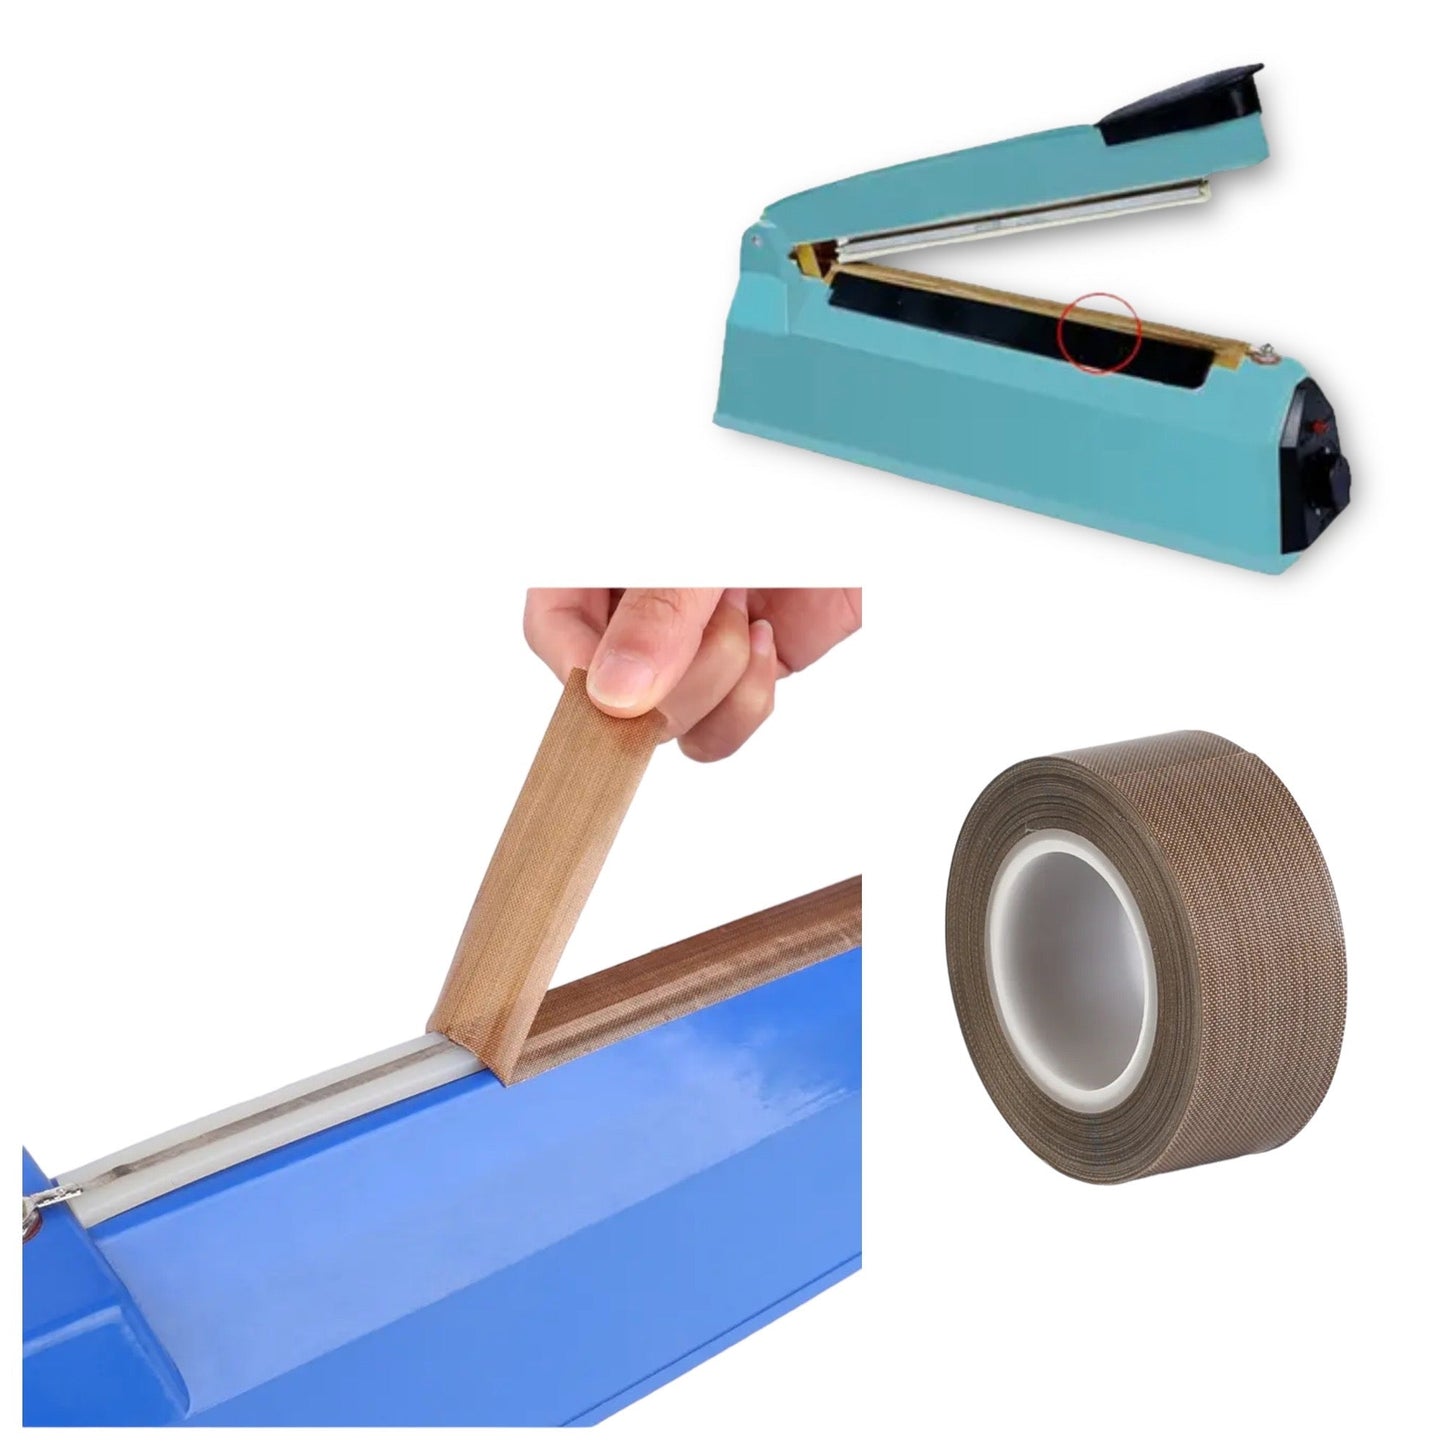 Timmy Toys - AX041 - High-Temperature Tape Roll. PTFE Tape Roll with Adhesive for Vacuum Sealers and High Temperatures - 10 Meters - 2 Sizes - 1 Piece